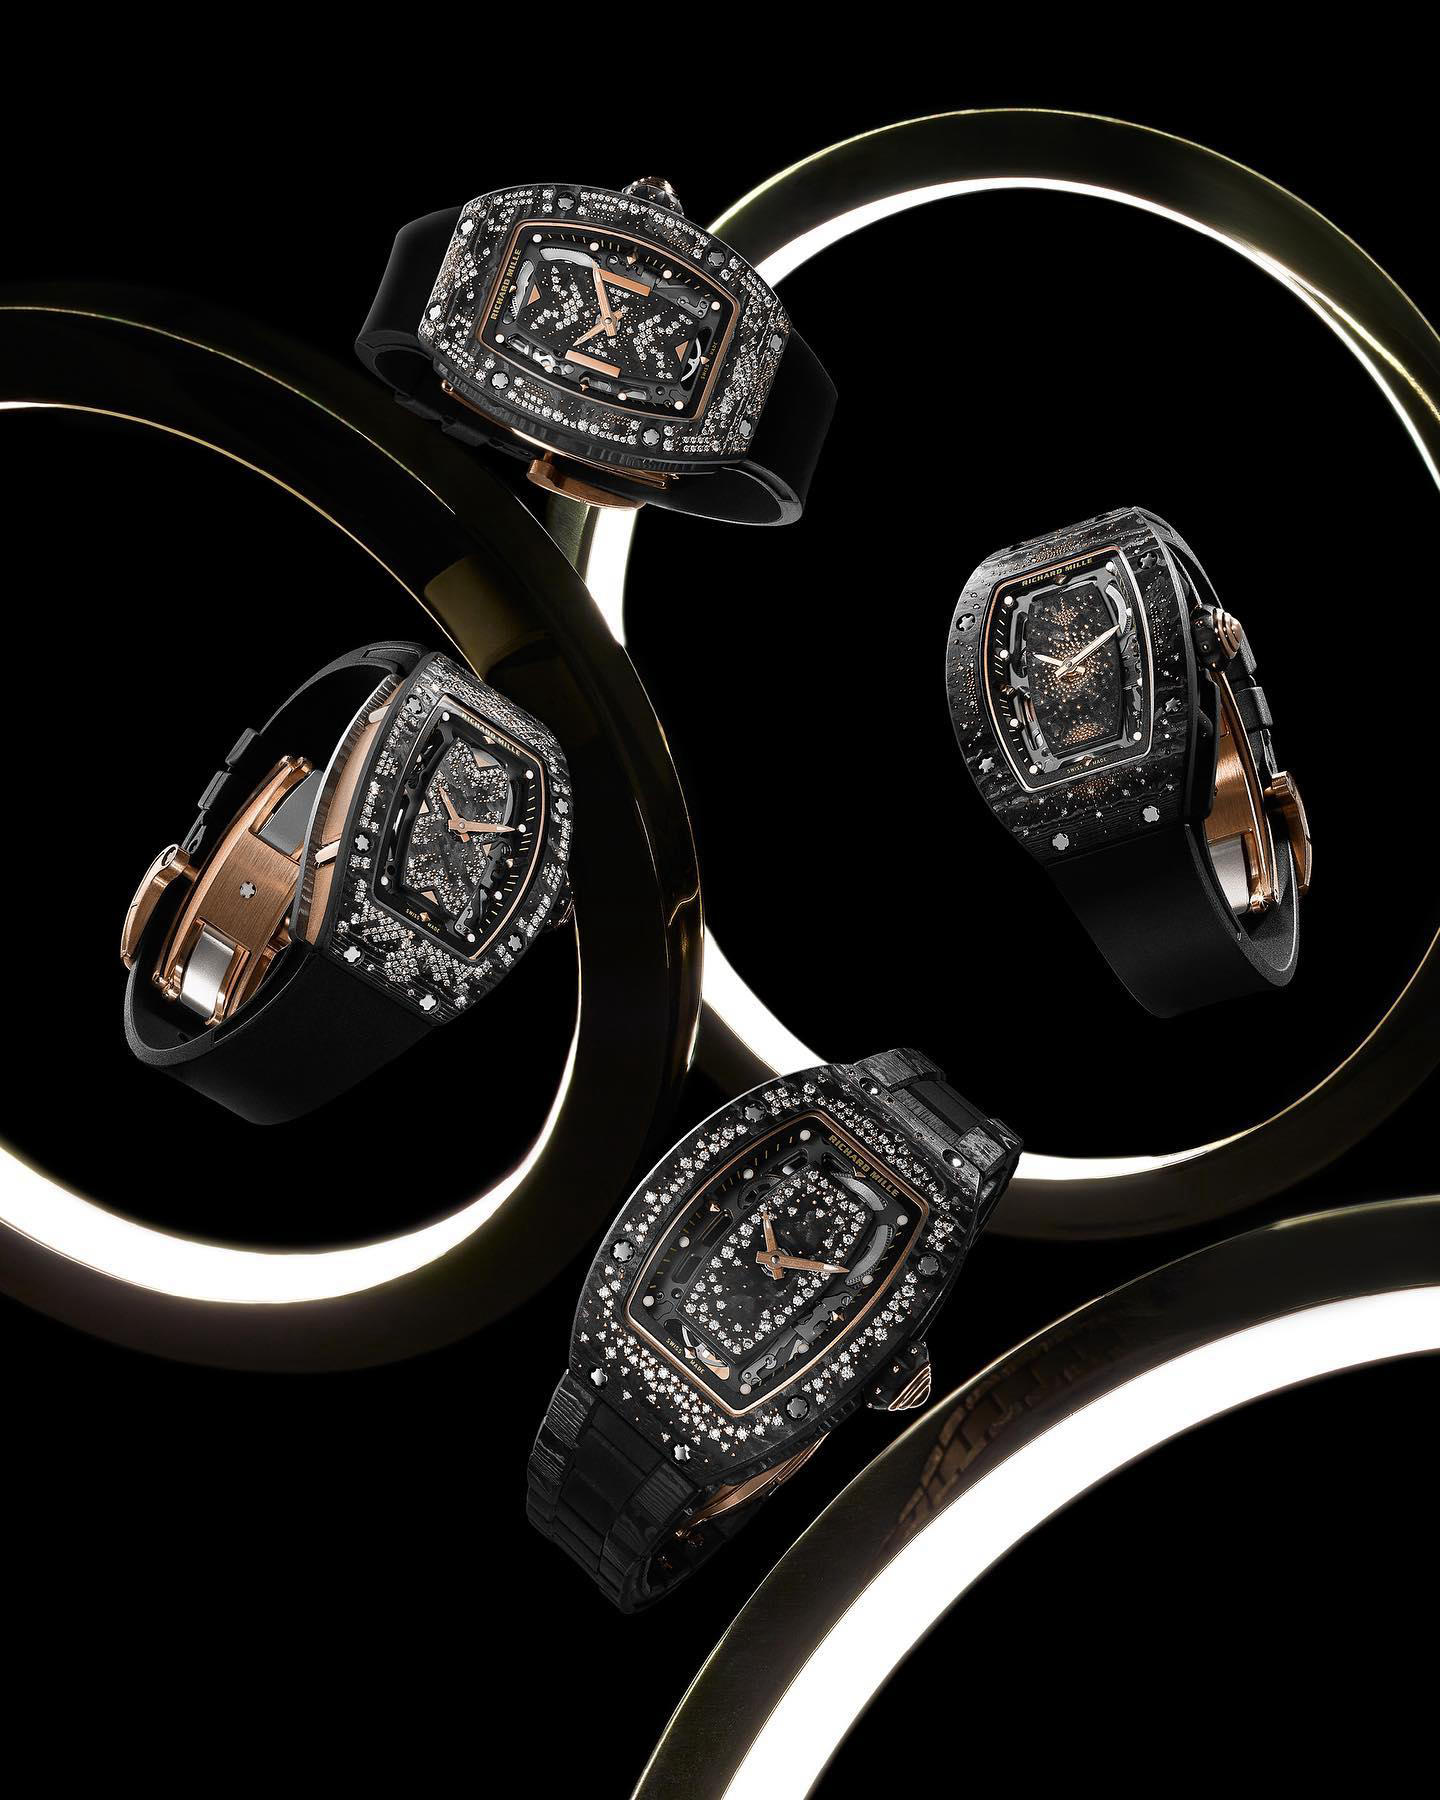 Richard Mille - Behold the early universe